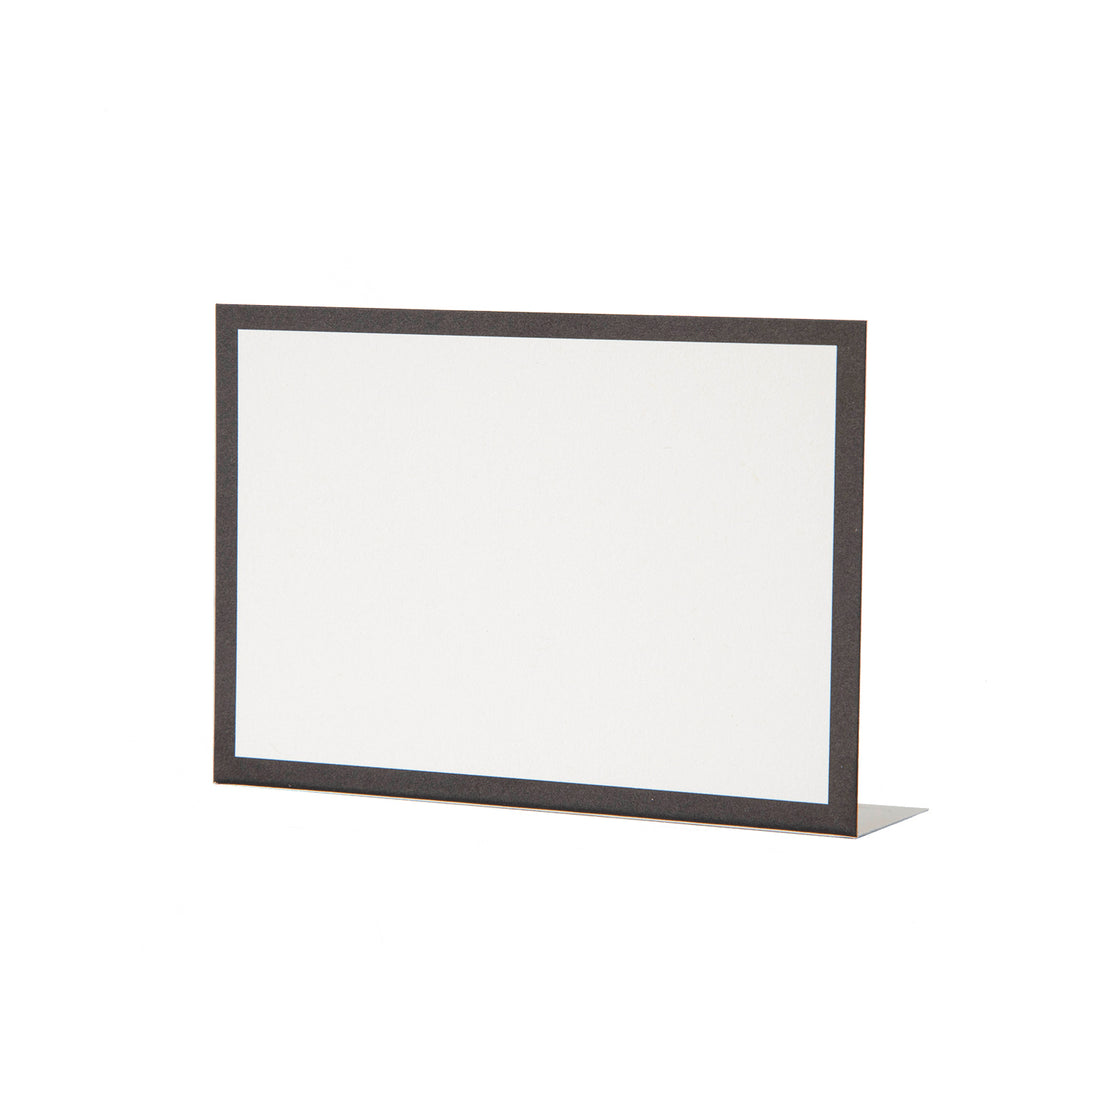 A Hester &amp; Cook black frame place card with a black frame on a white background, perfect for labeling guests.